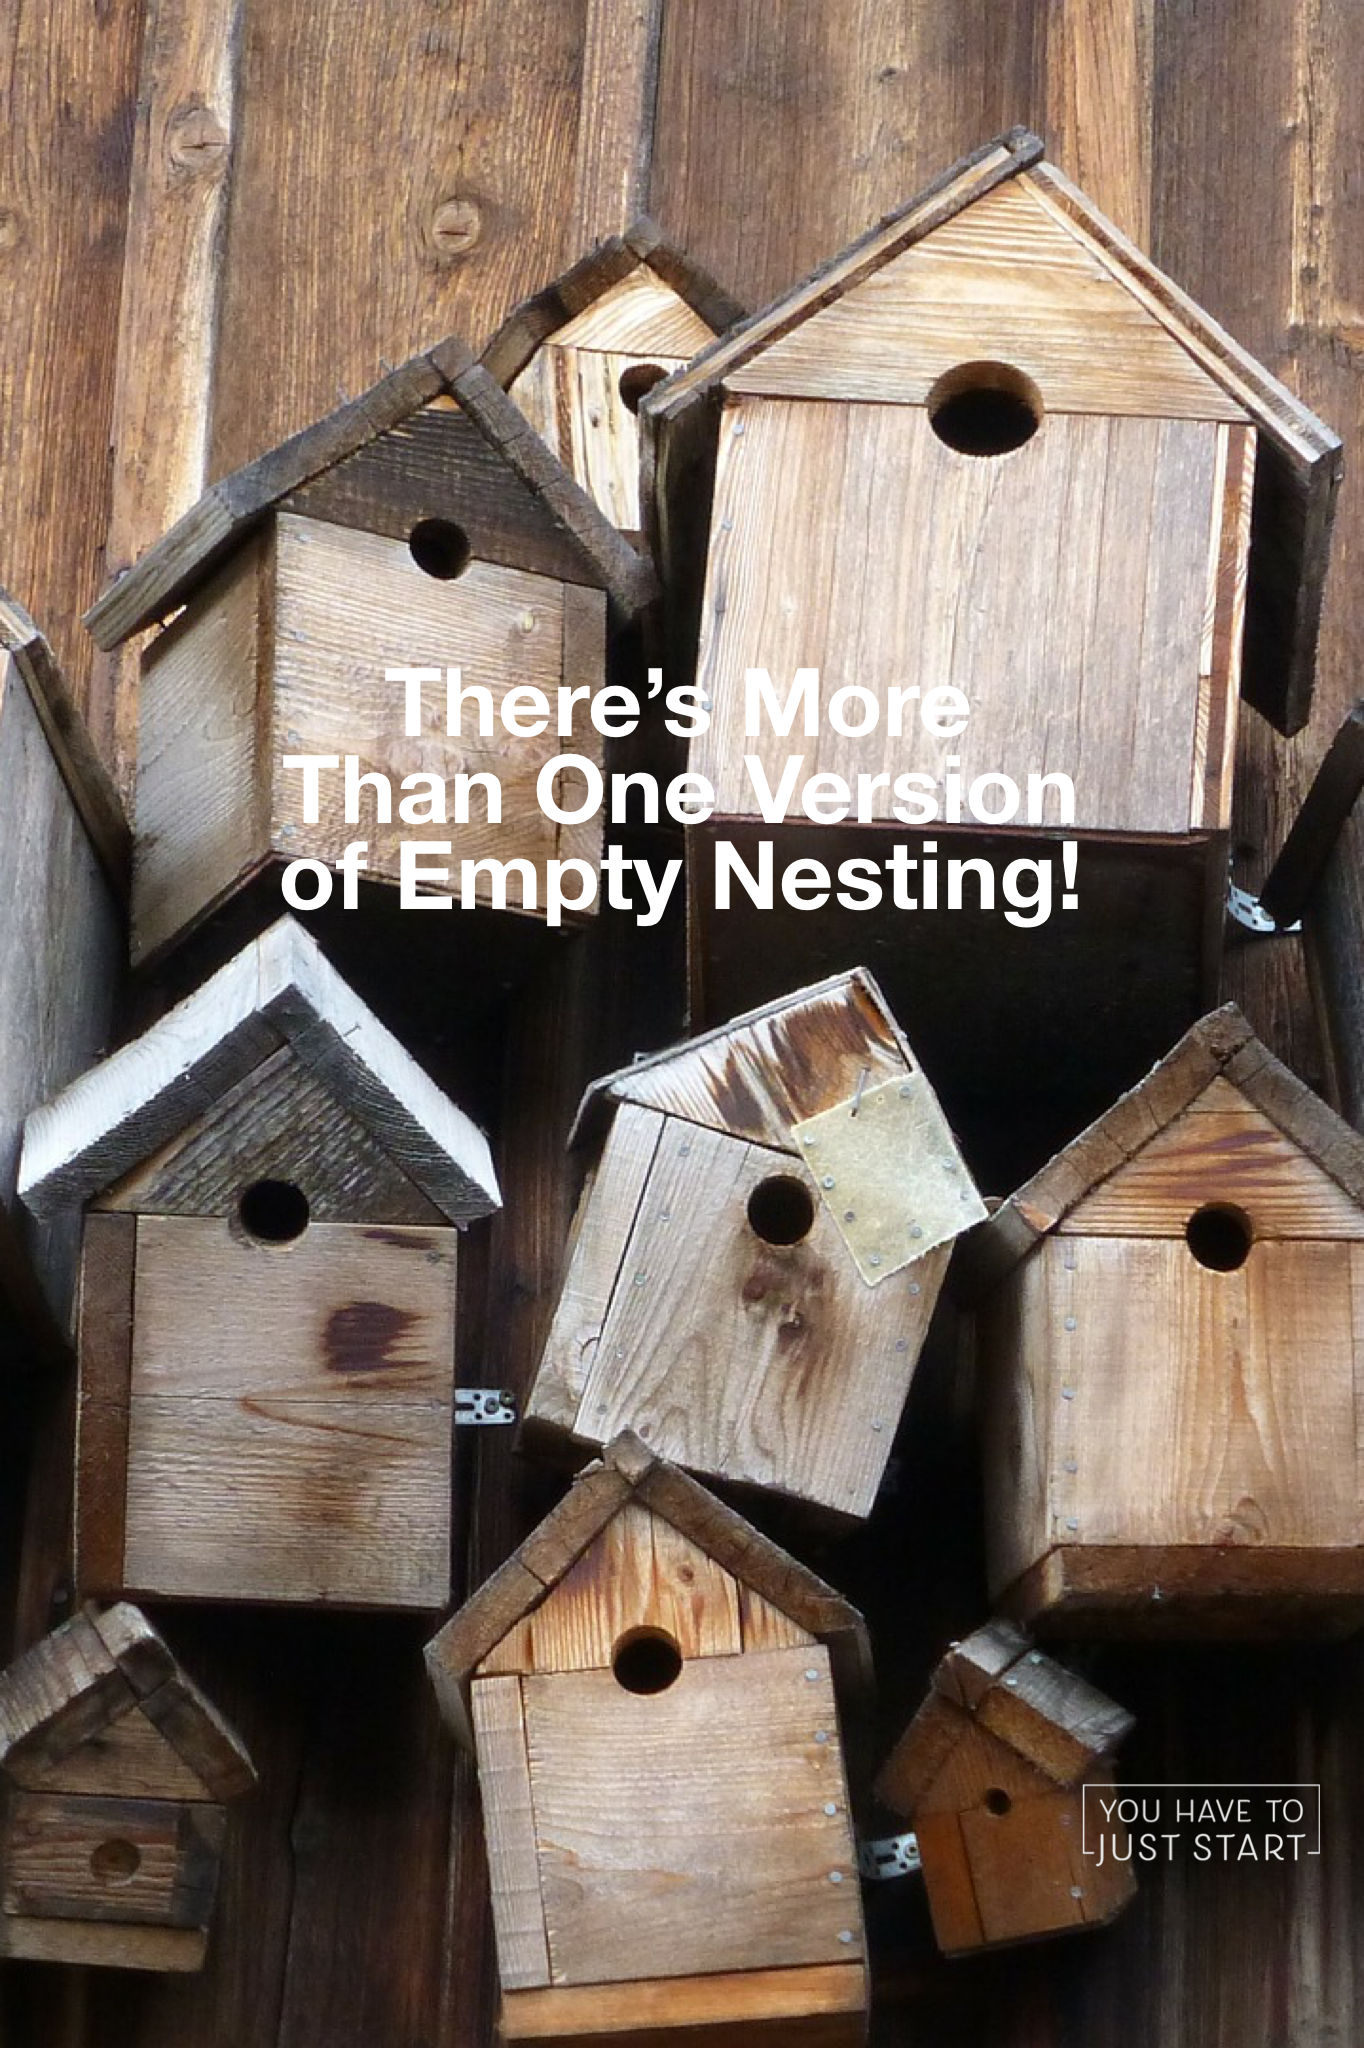 There's More Than One Version of Empty Nesting!